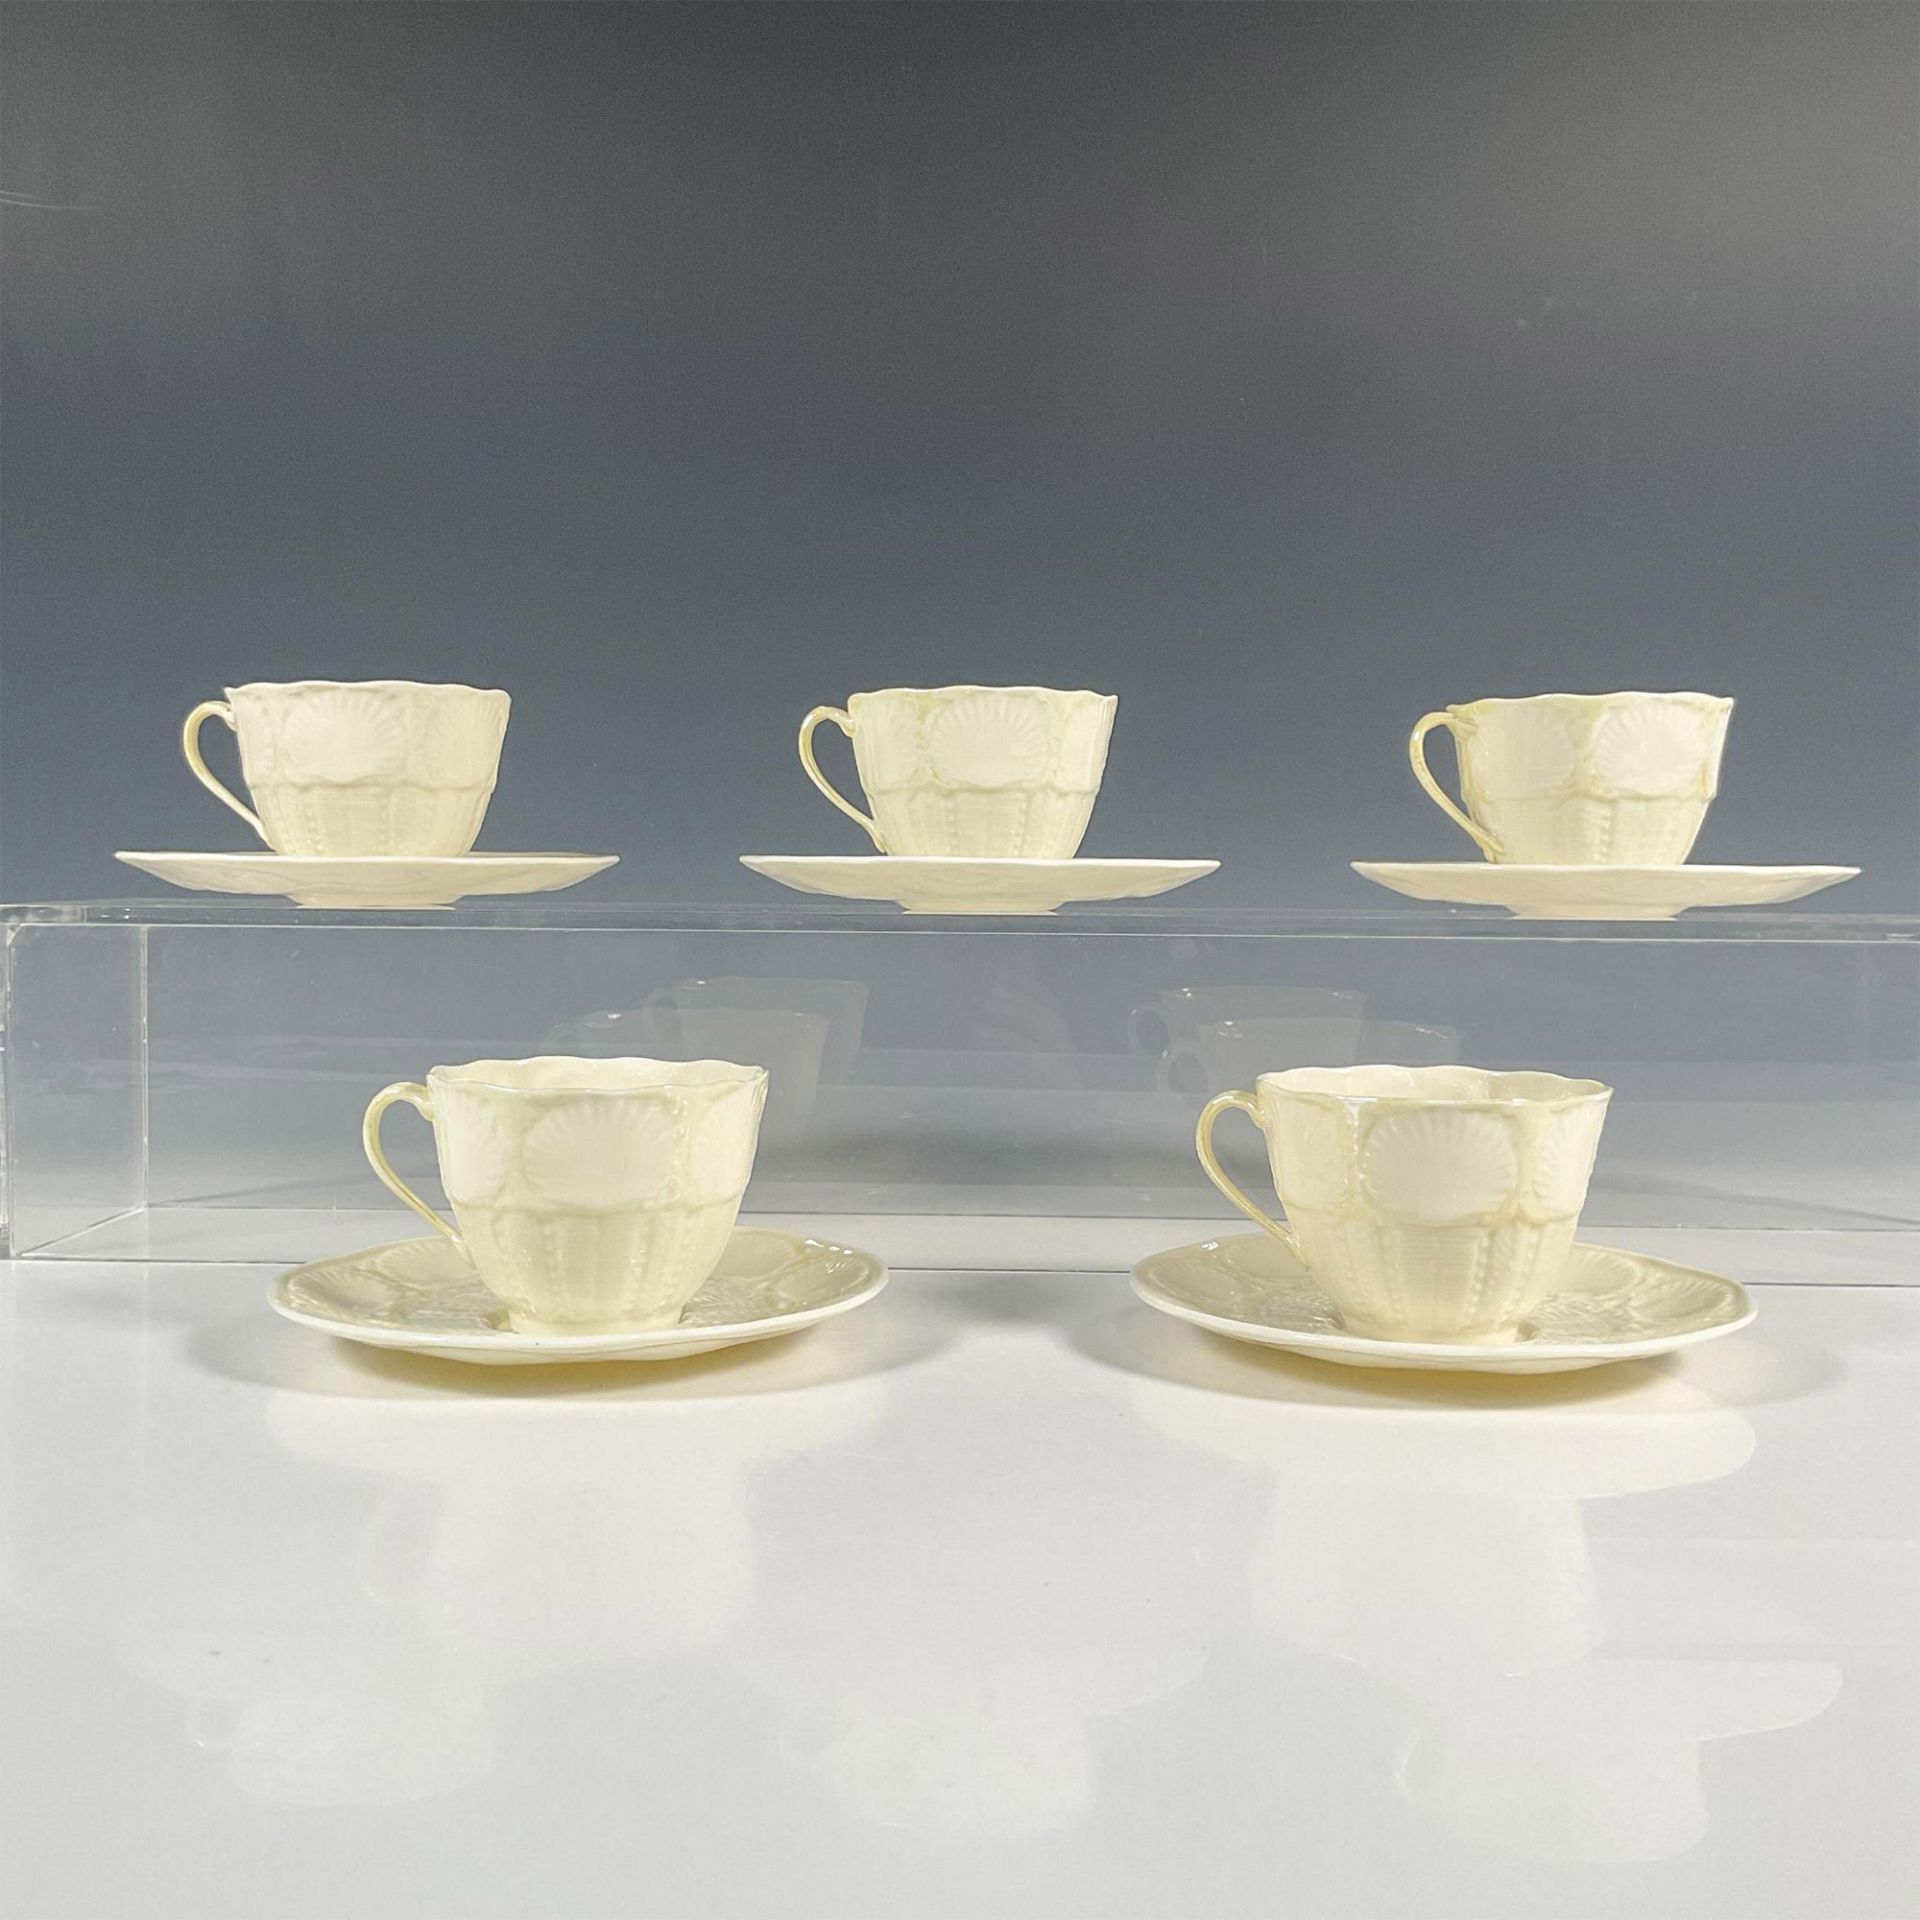 10pc Belleek Pottery Porcelain Cup and Saucer Set, New Shell - Image 2 of 4